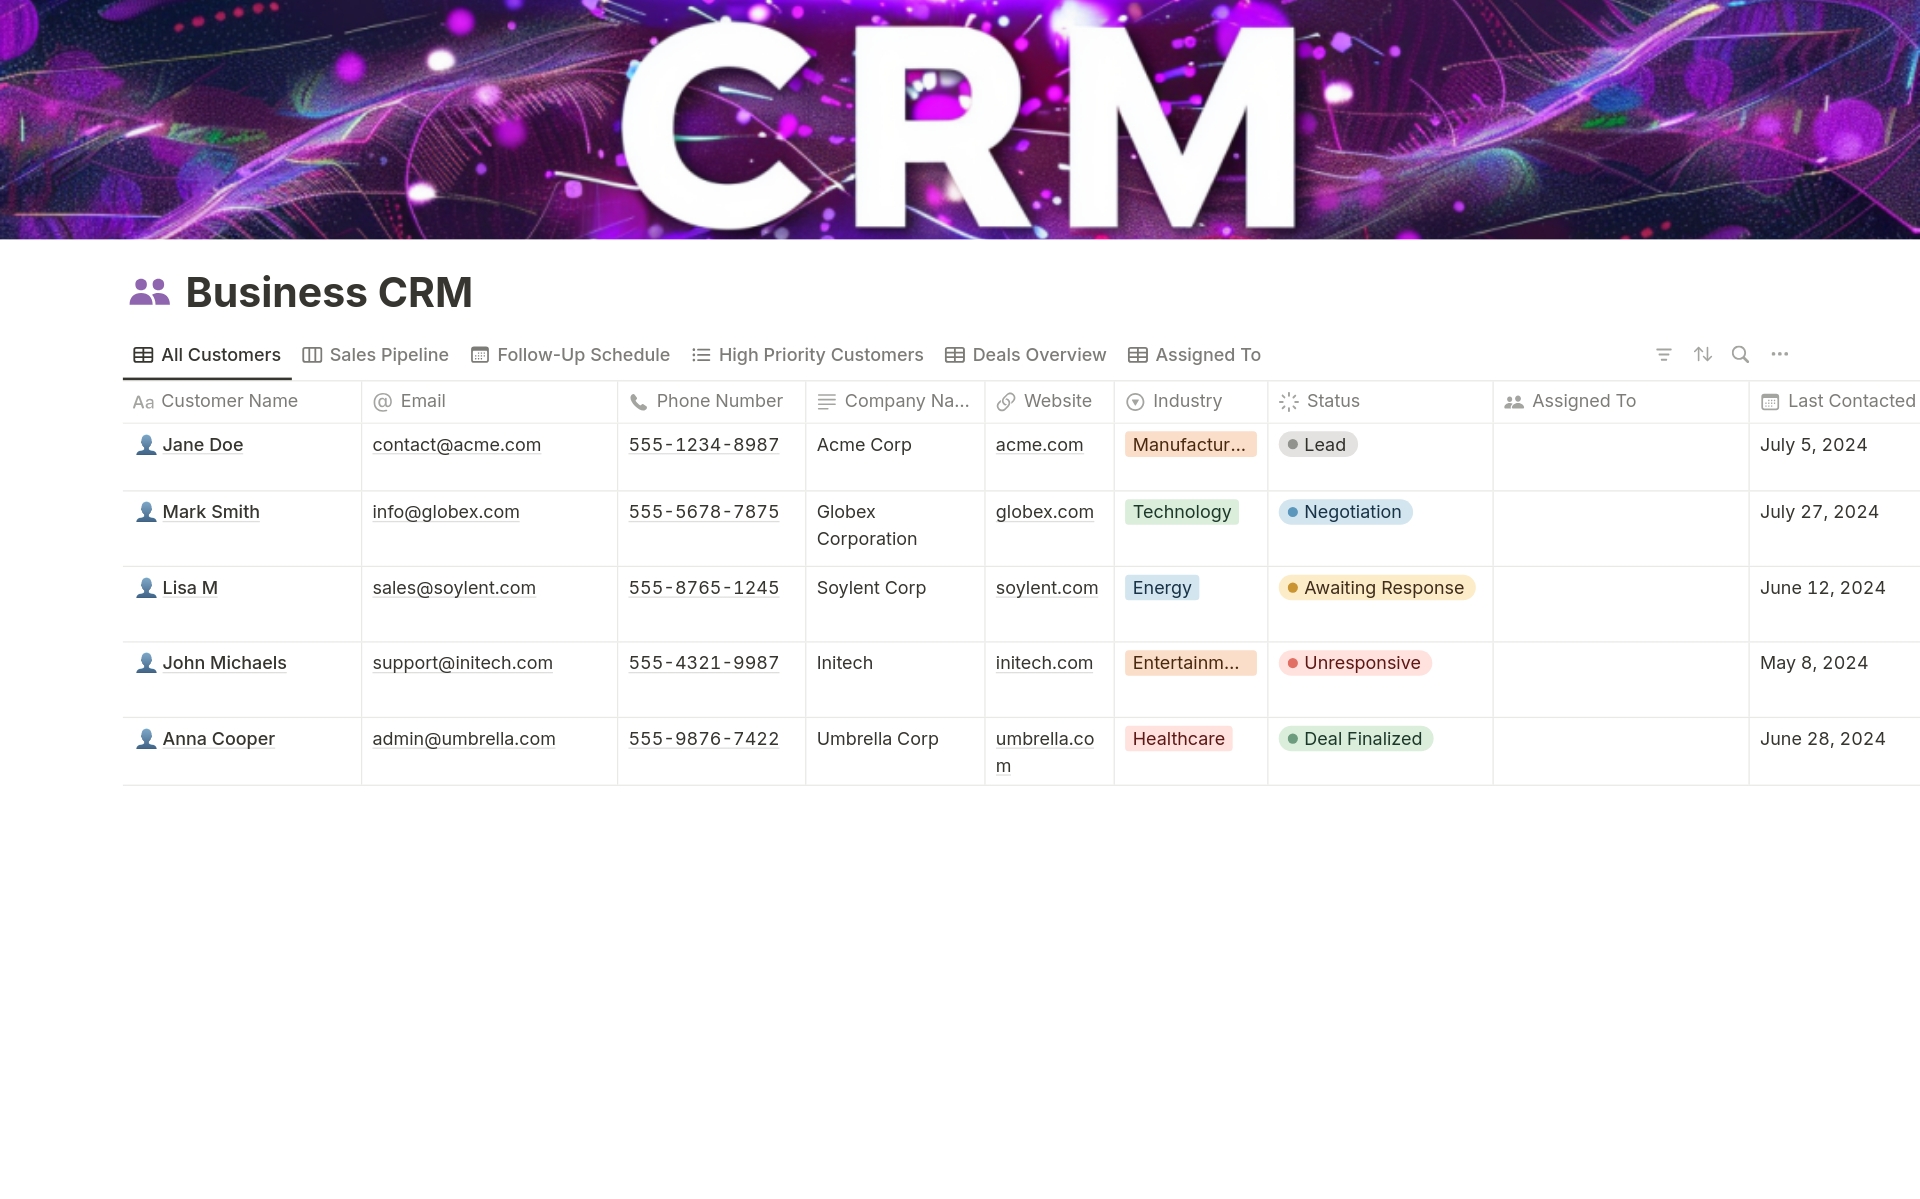 Transform your sales process with our advanced CRM tool. 
Centralize customer data 📊, 
automate follow-ups 🔔
analyze sales 📈
boost efficiency 
track progress 📋
enhance engagement 💬
and gain insights 🔍

Elevate your business and drive growth effortlessly!